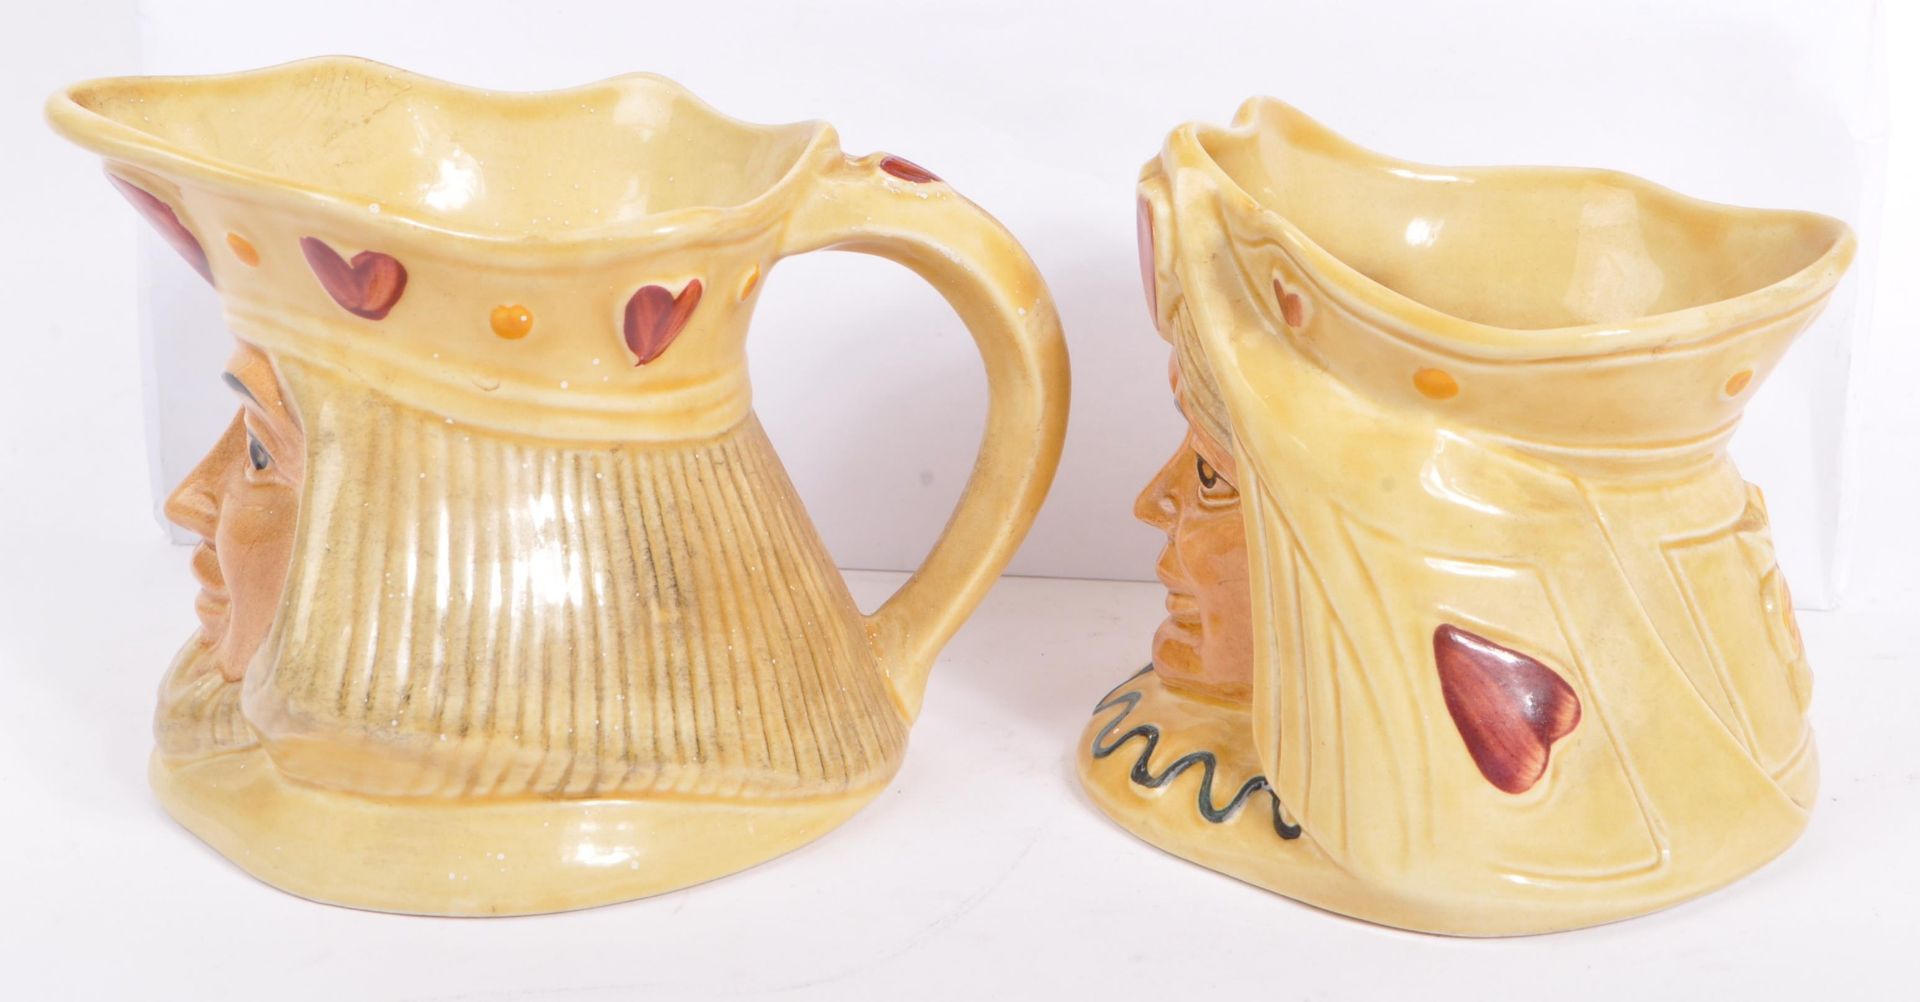 SET OF 20TH CENTURY CERAMIC 'PACK OF CARDS' HJ WOOD TOBY JUGS - Image 9 of 11